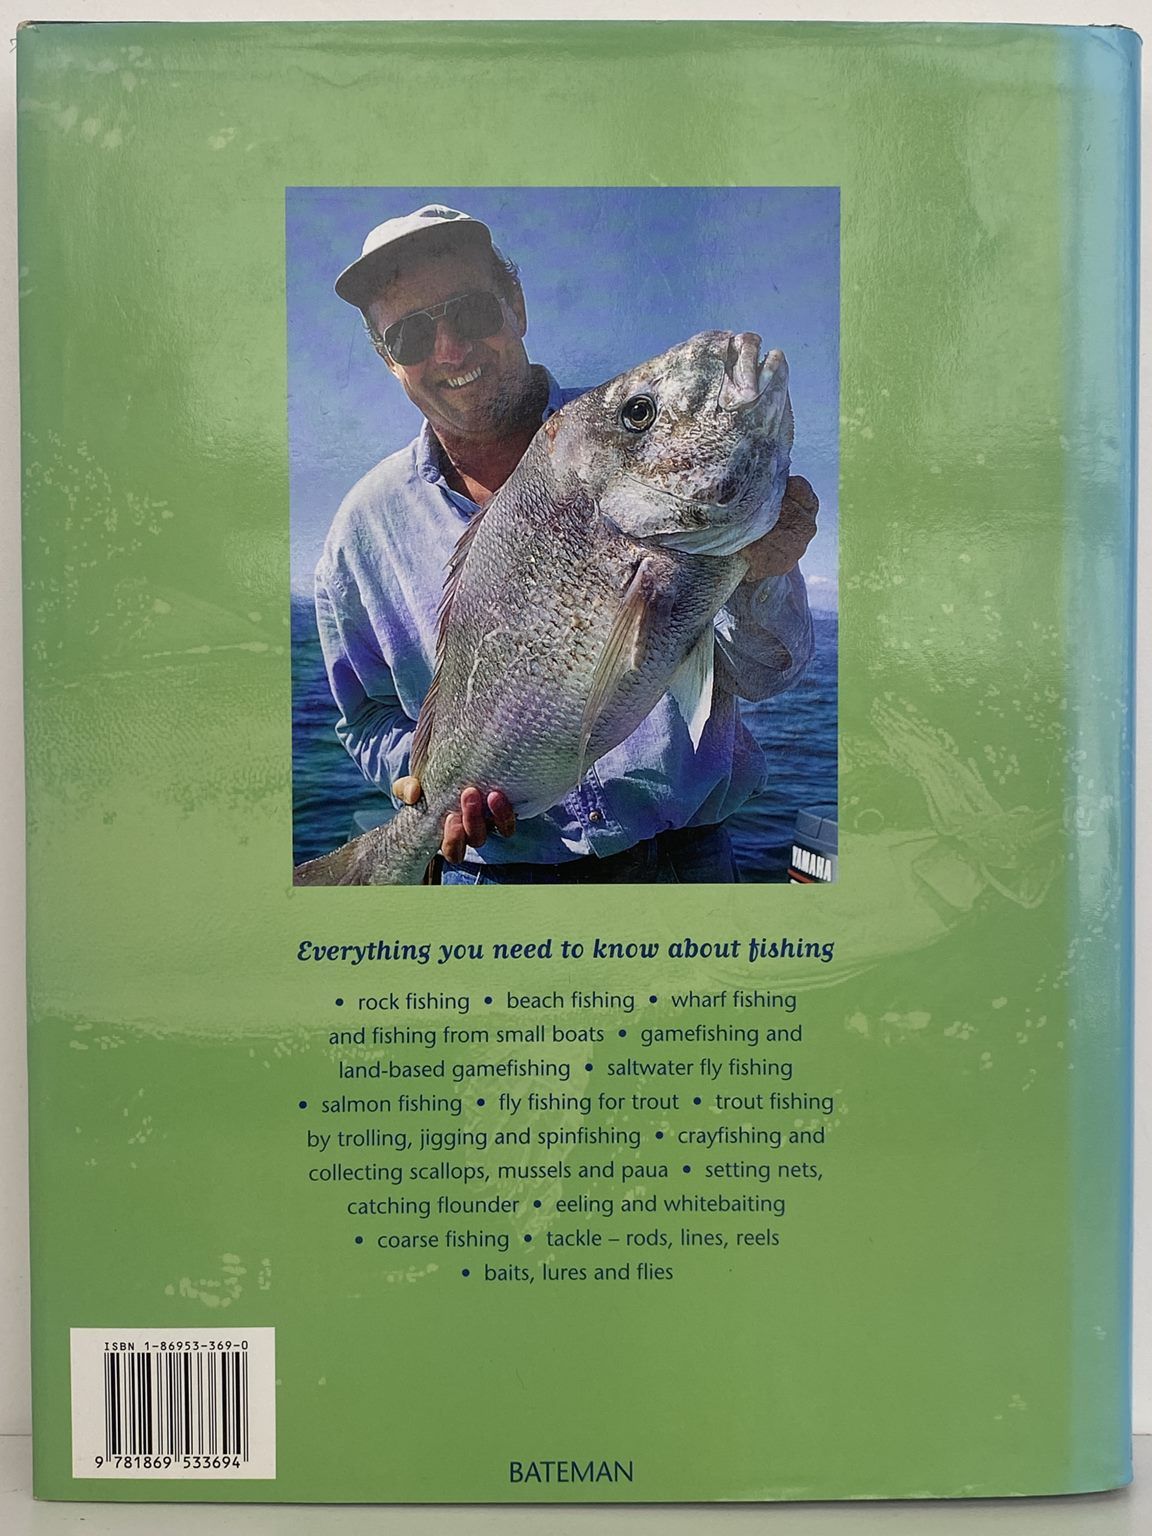 THE COMPLETE NZ FISHERMAN: Saltwater and freshwater fishing